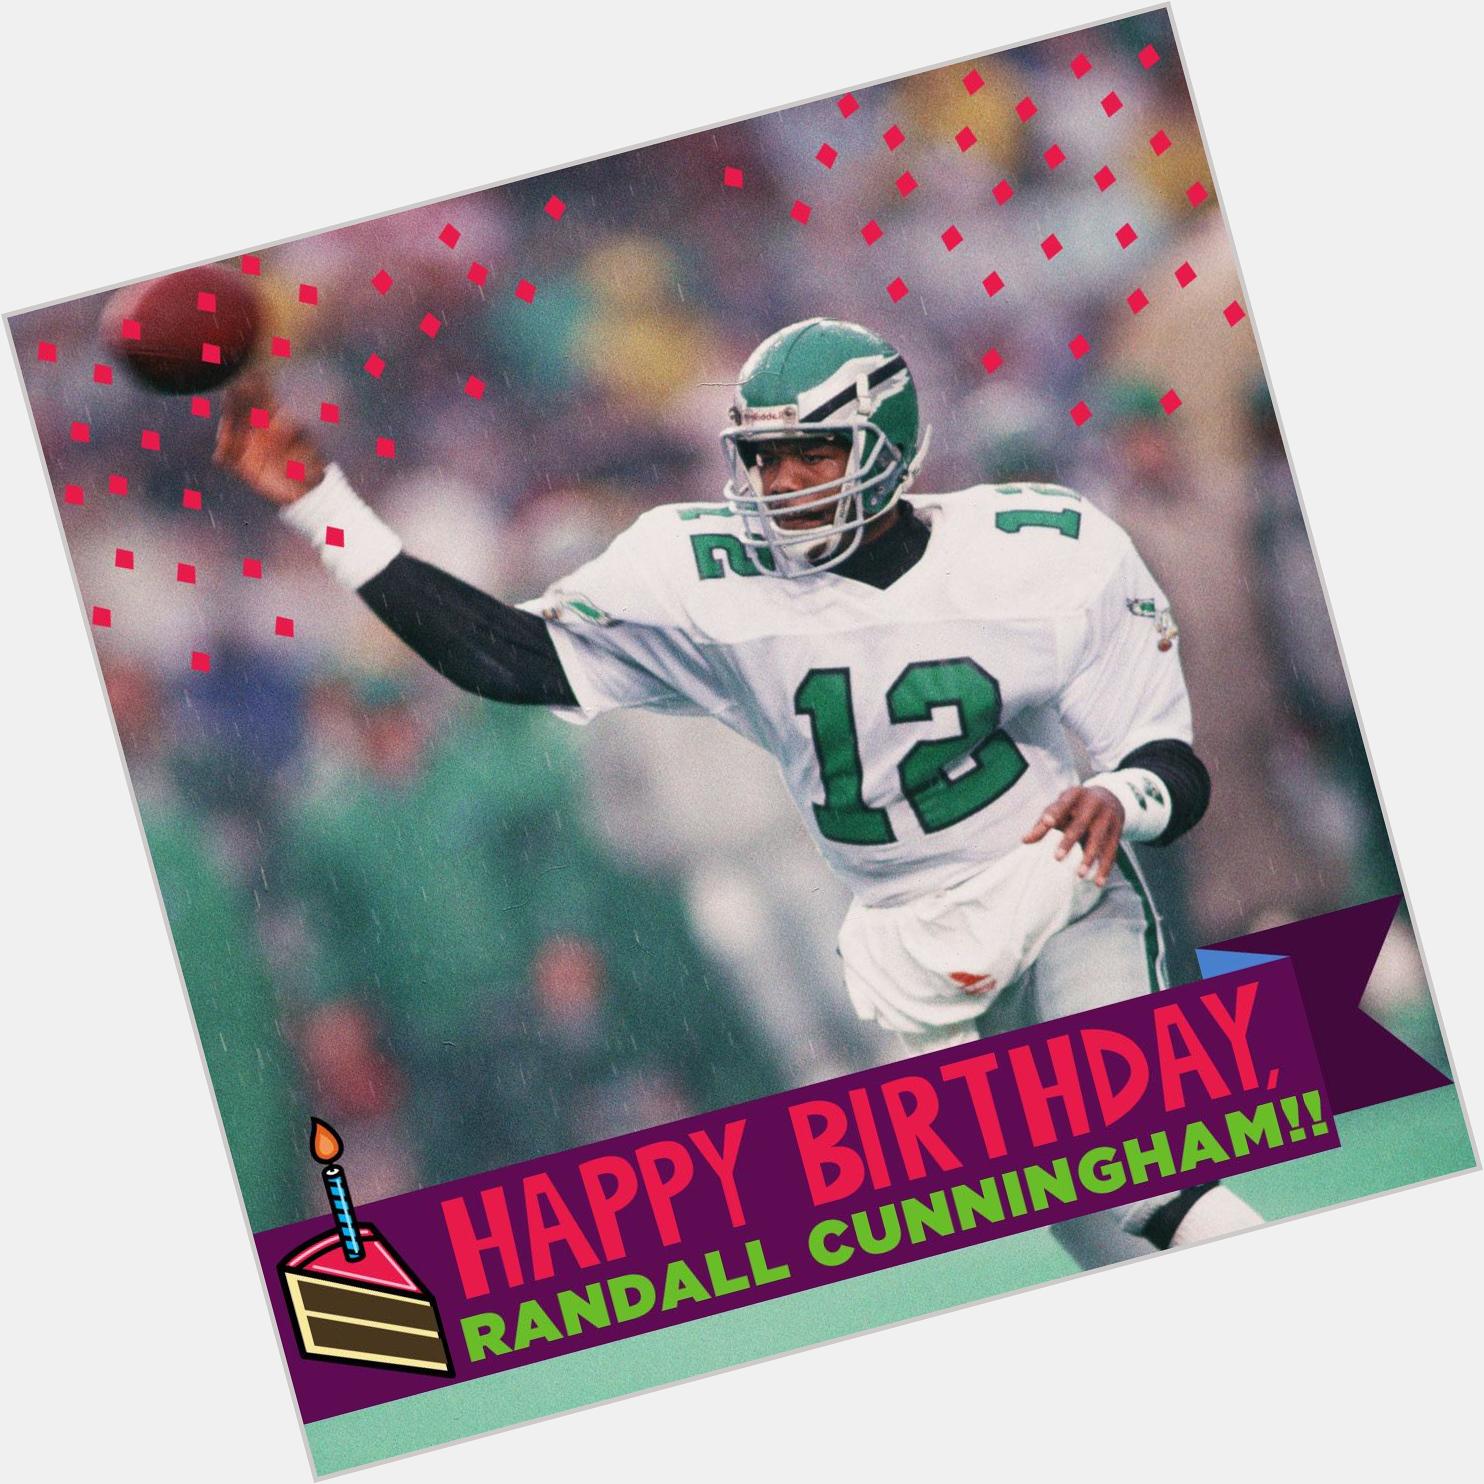 To wish a Happy Birthday to 4-time Pro Bowler Randall Cunningham! 